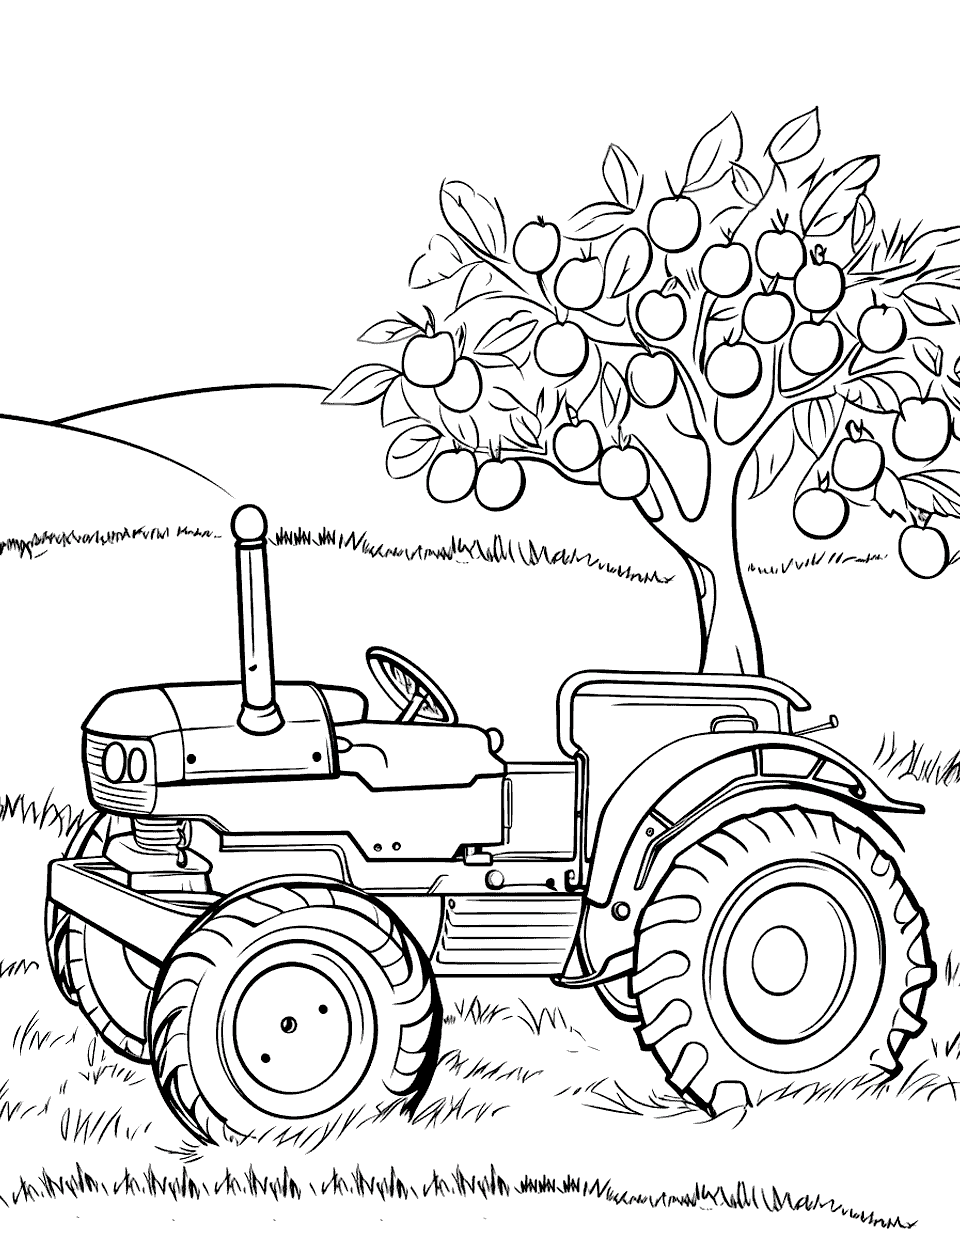 Tractor by the Apple Orchard Coloring Page - A tractor near an apple orchard with apples ready for harvest.